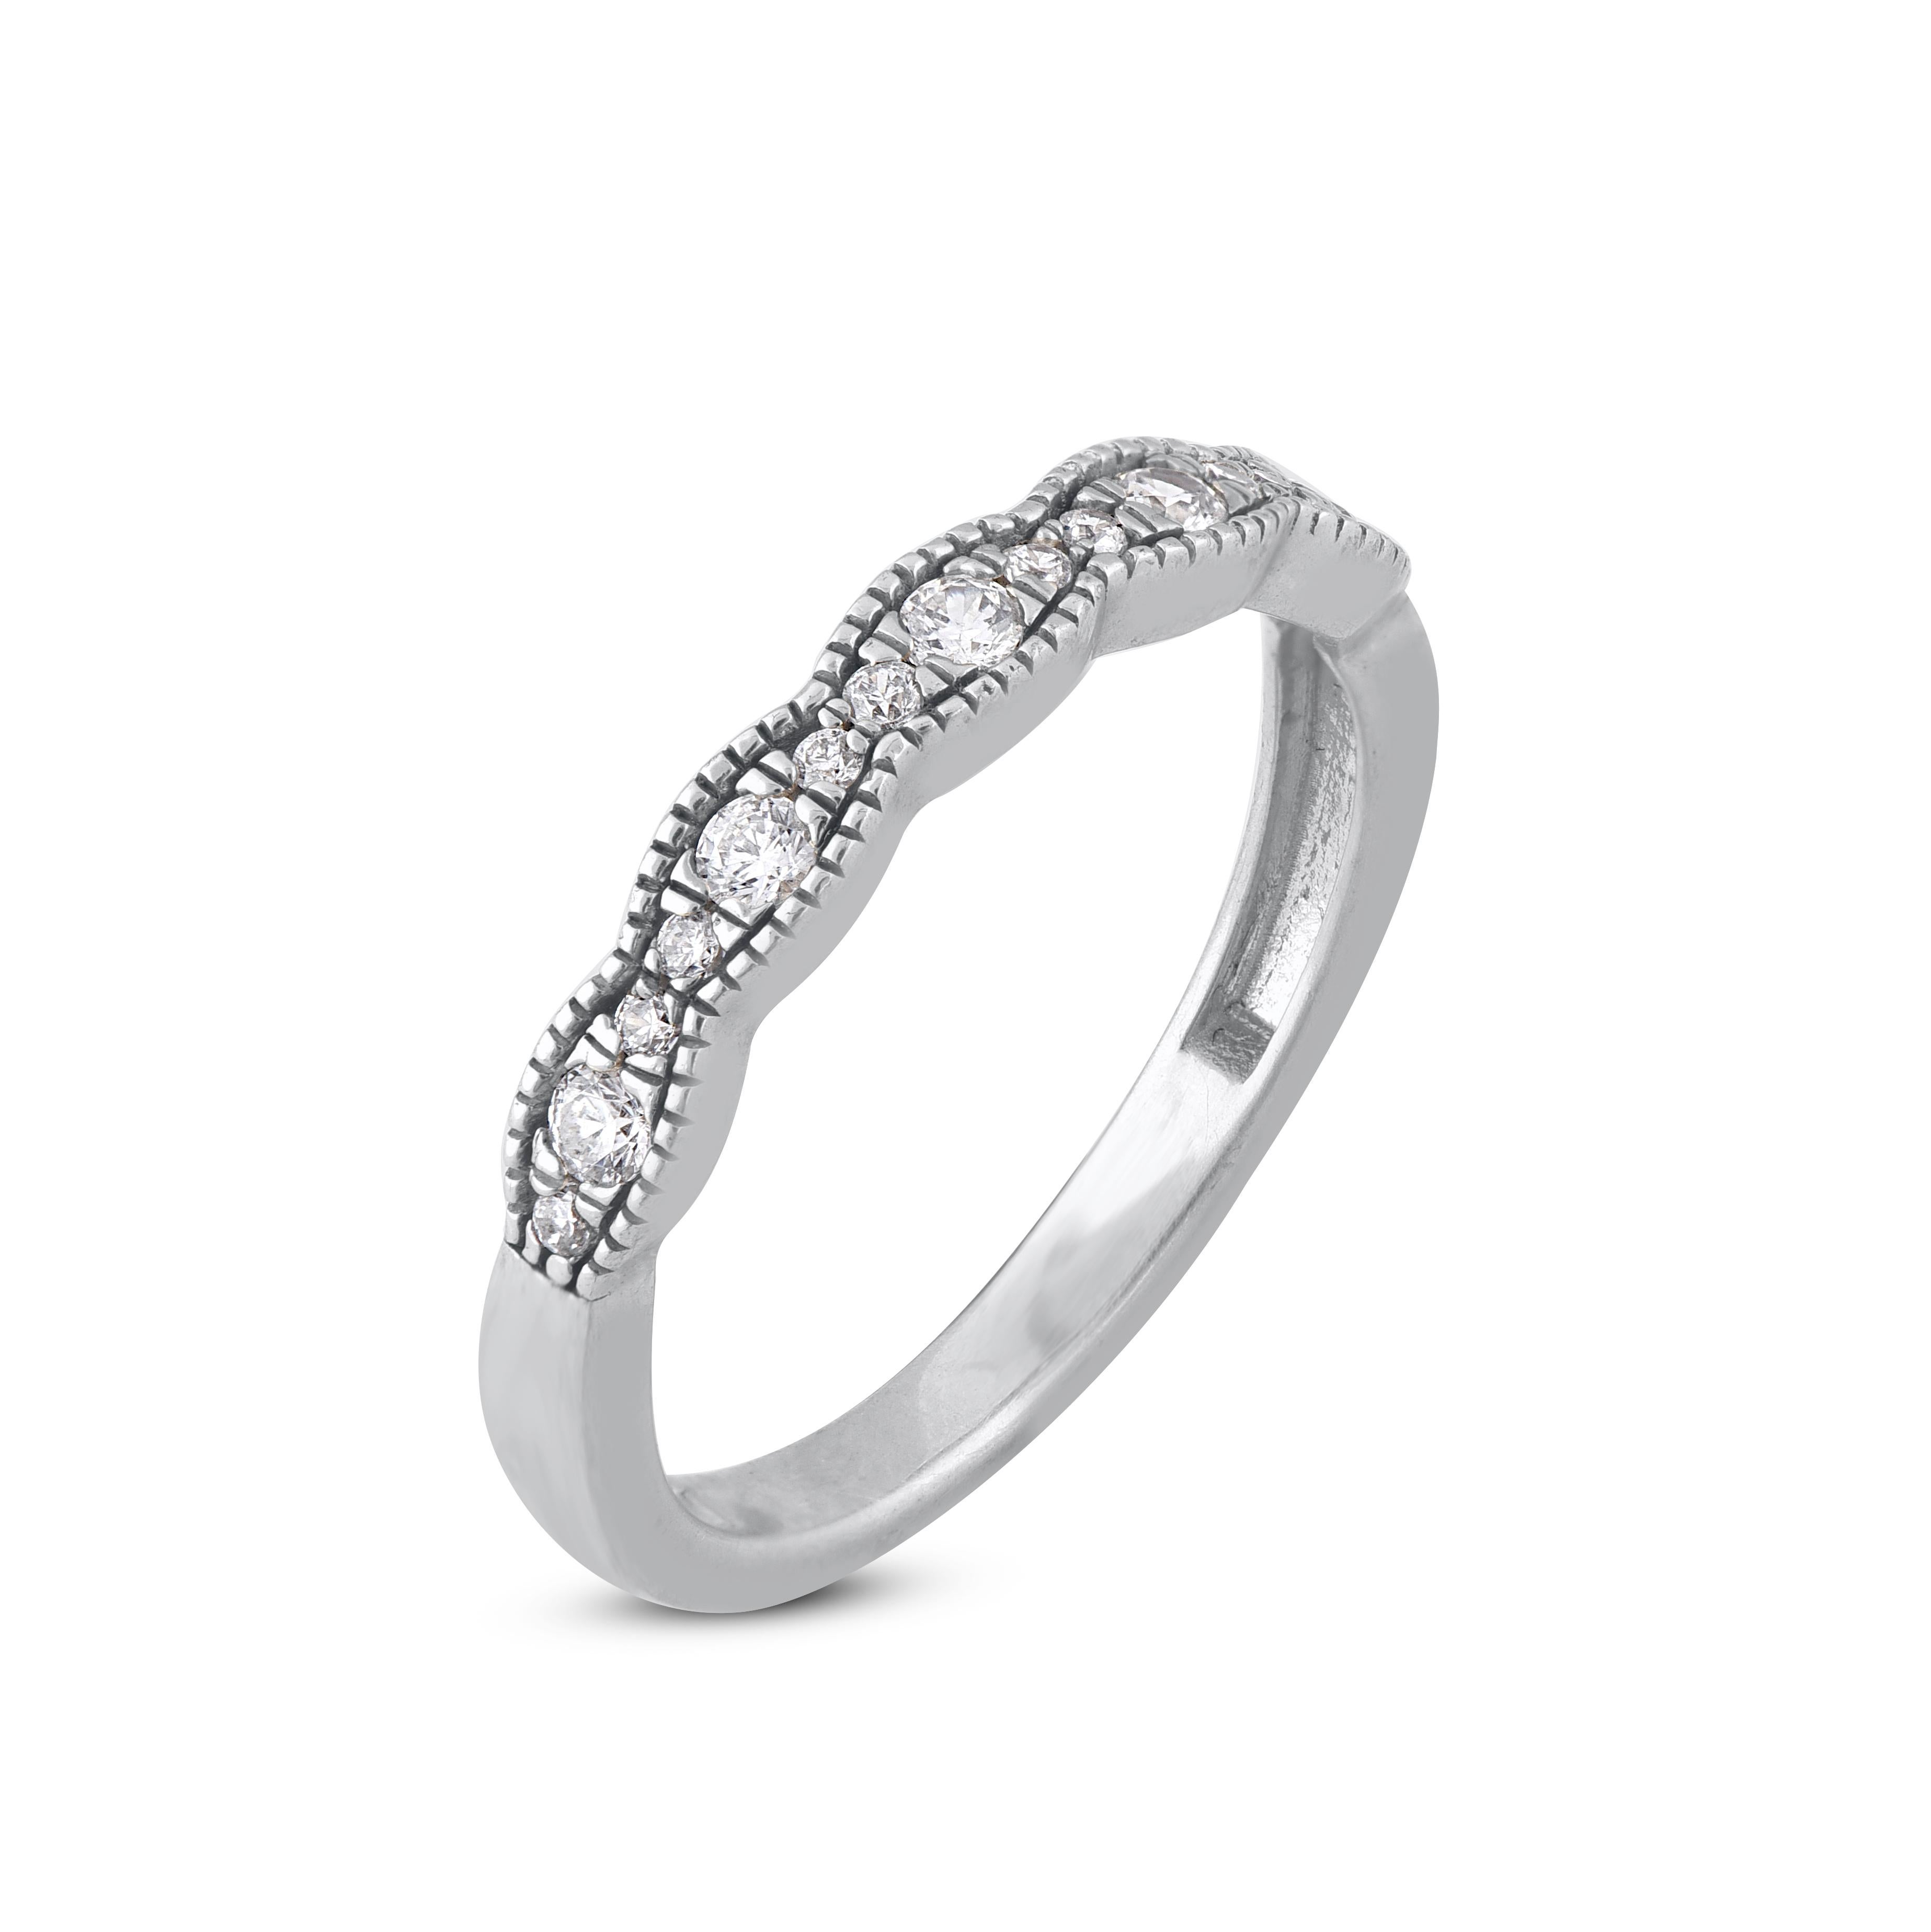 Art Deco TJD 0.25 Carat Brilliant Diamond 14KT White Gold Stackable Wedding Band Ring For Sale